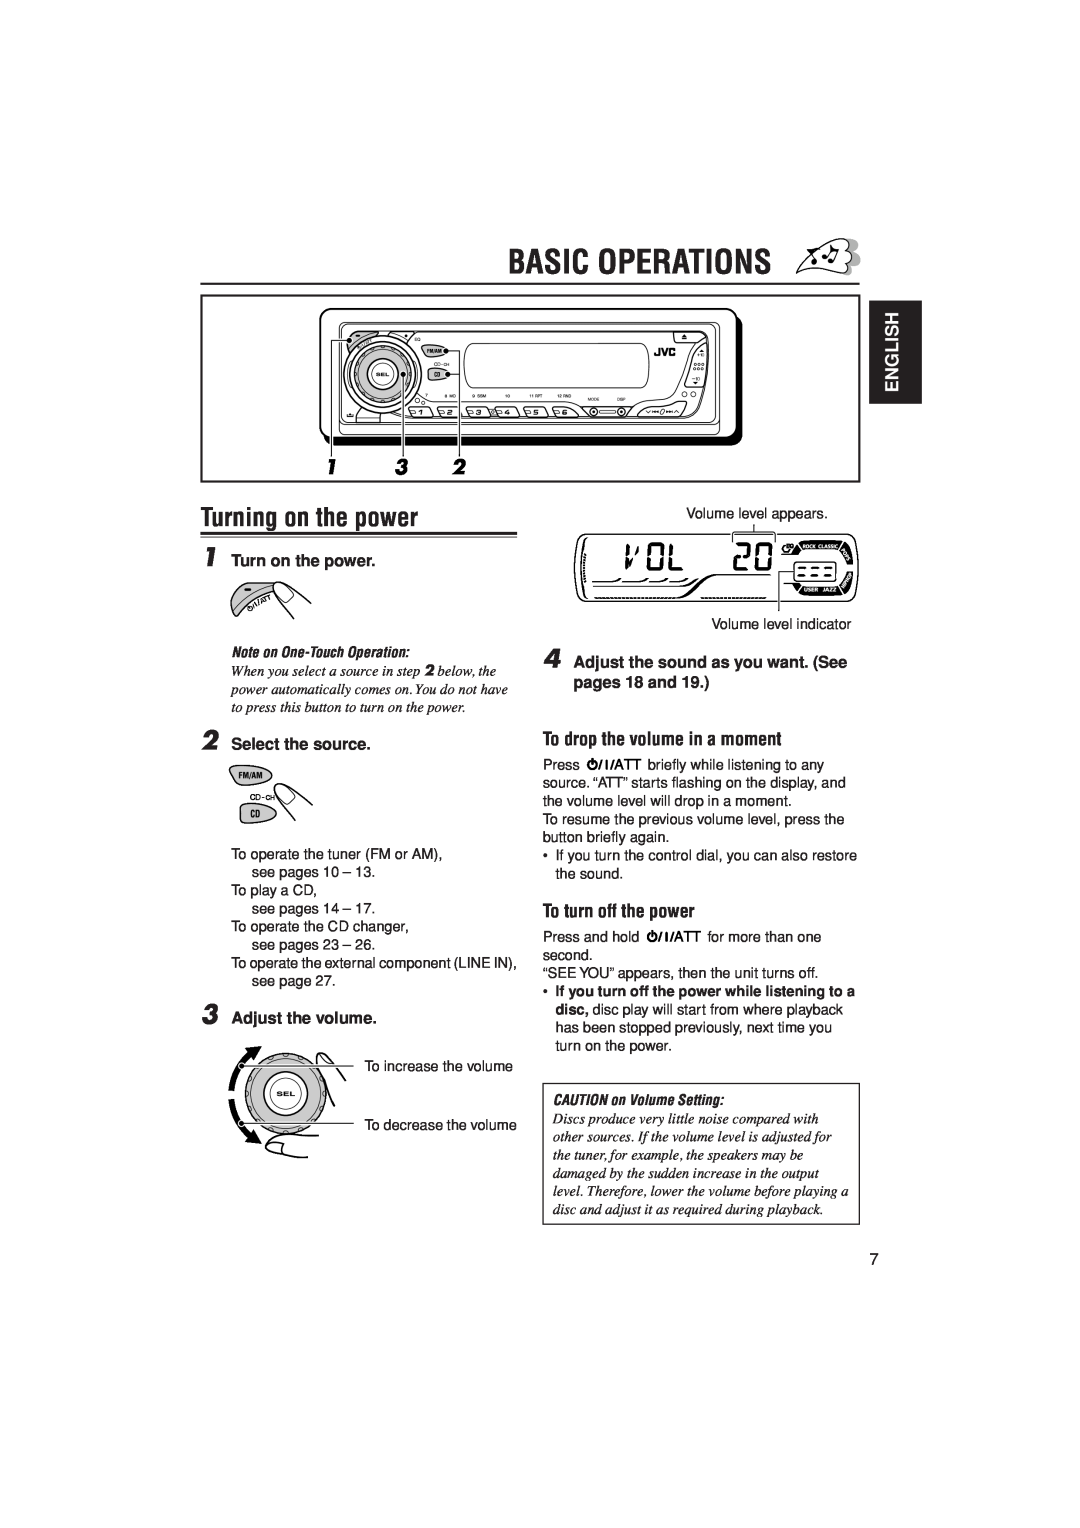 JVC KD-G305 manual Basic Operations, Turning on the power, English, To drop the volume in a moment, To turn off the power 